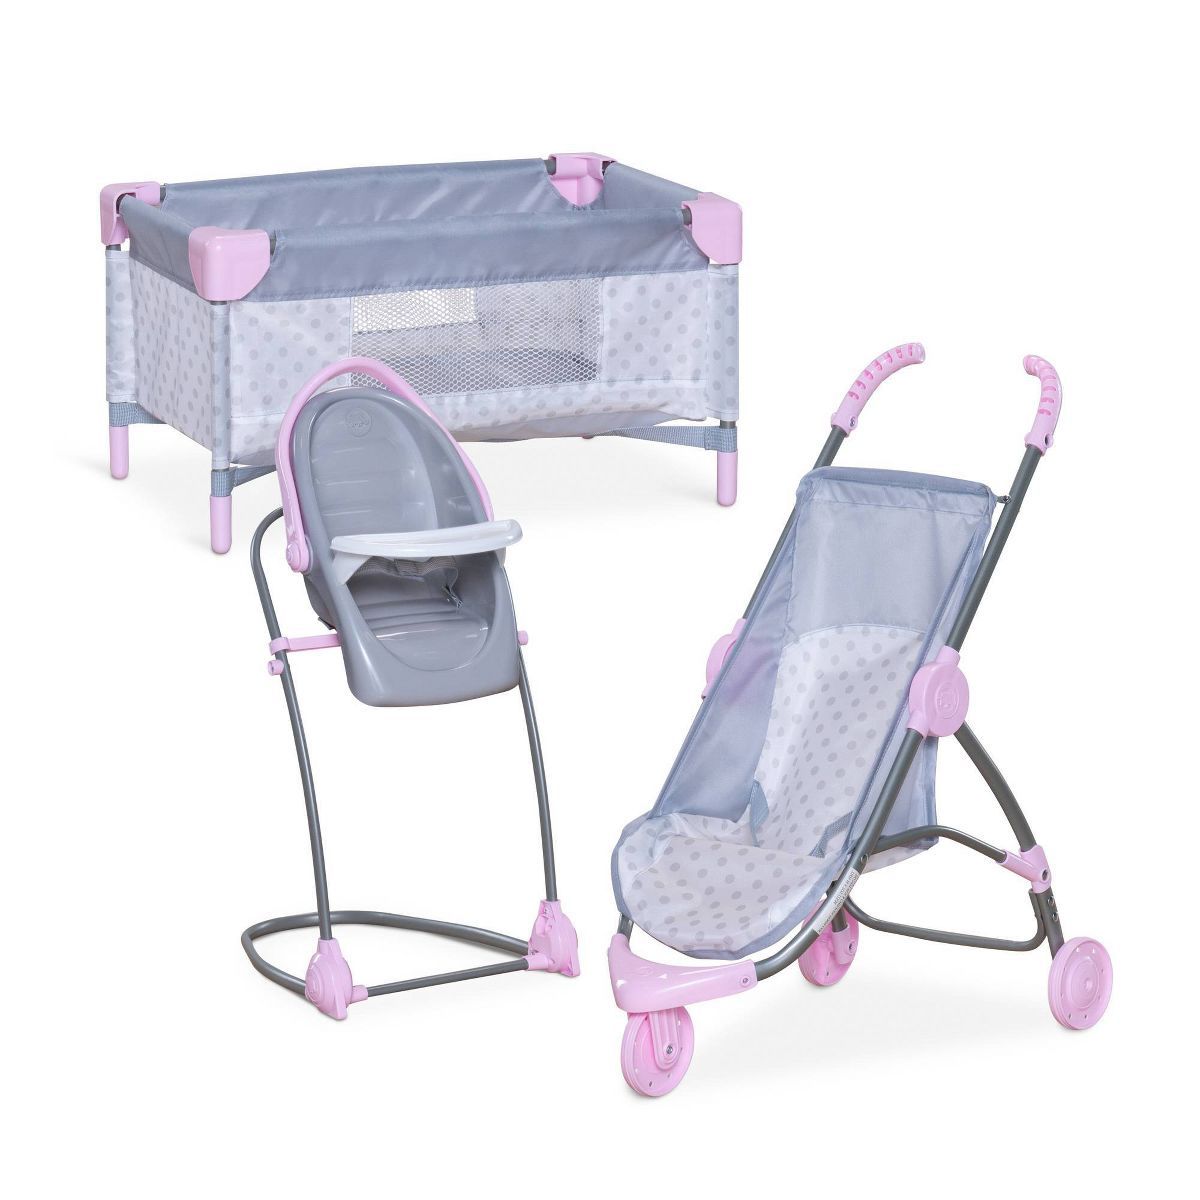 Perfectly Cute Deluxe Nursery Baby Doll Playset | Target